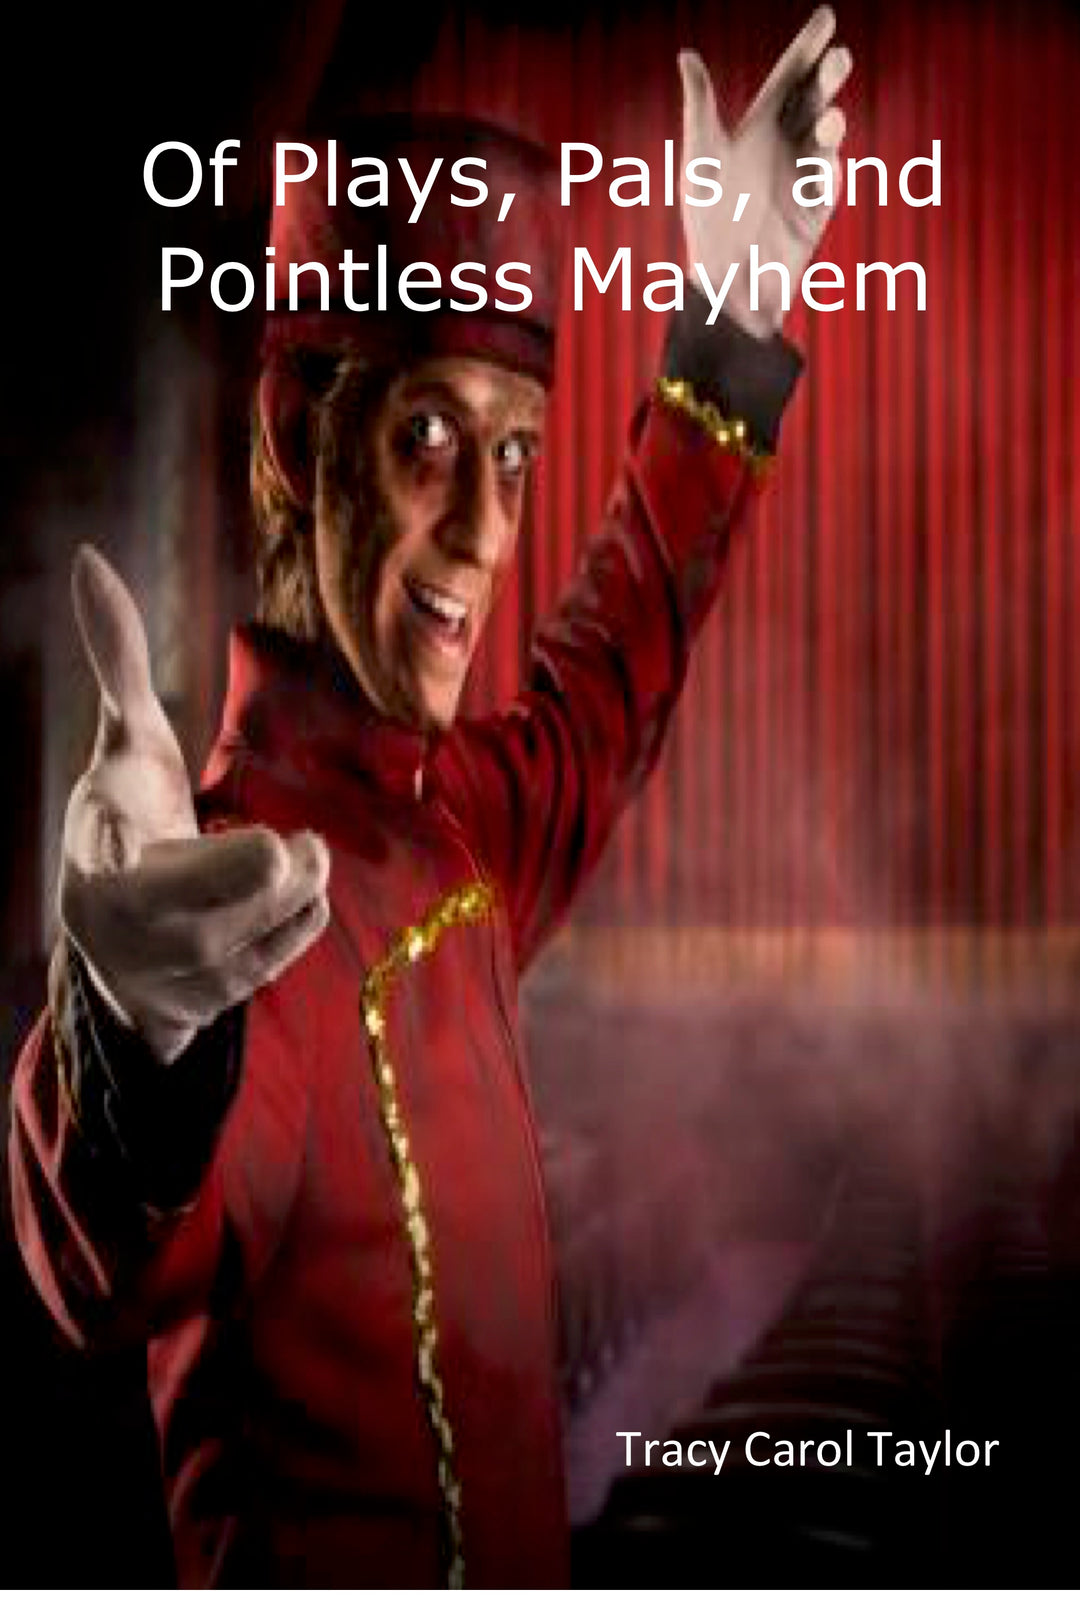 Of Plays, Pals, and Pointless Mayhem - Young Adult Fiction